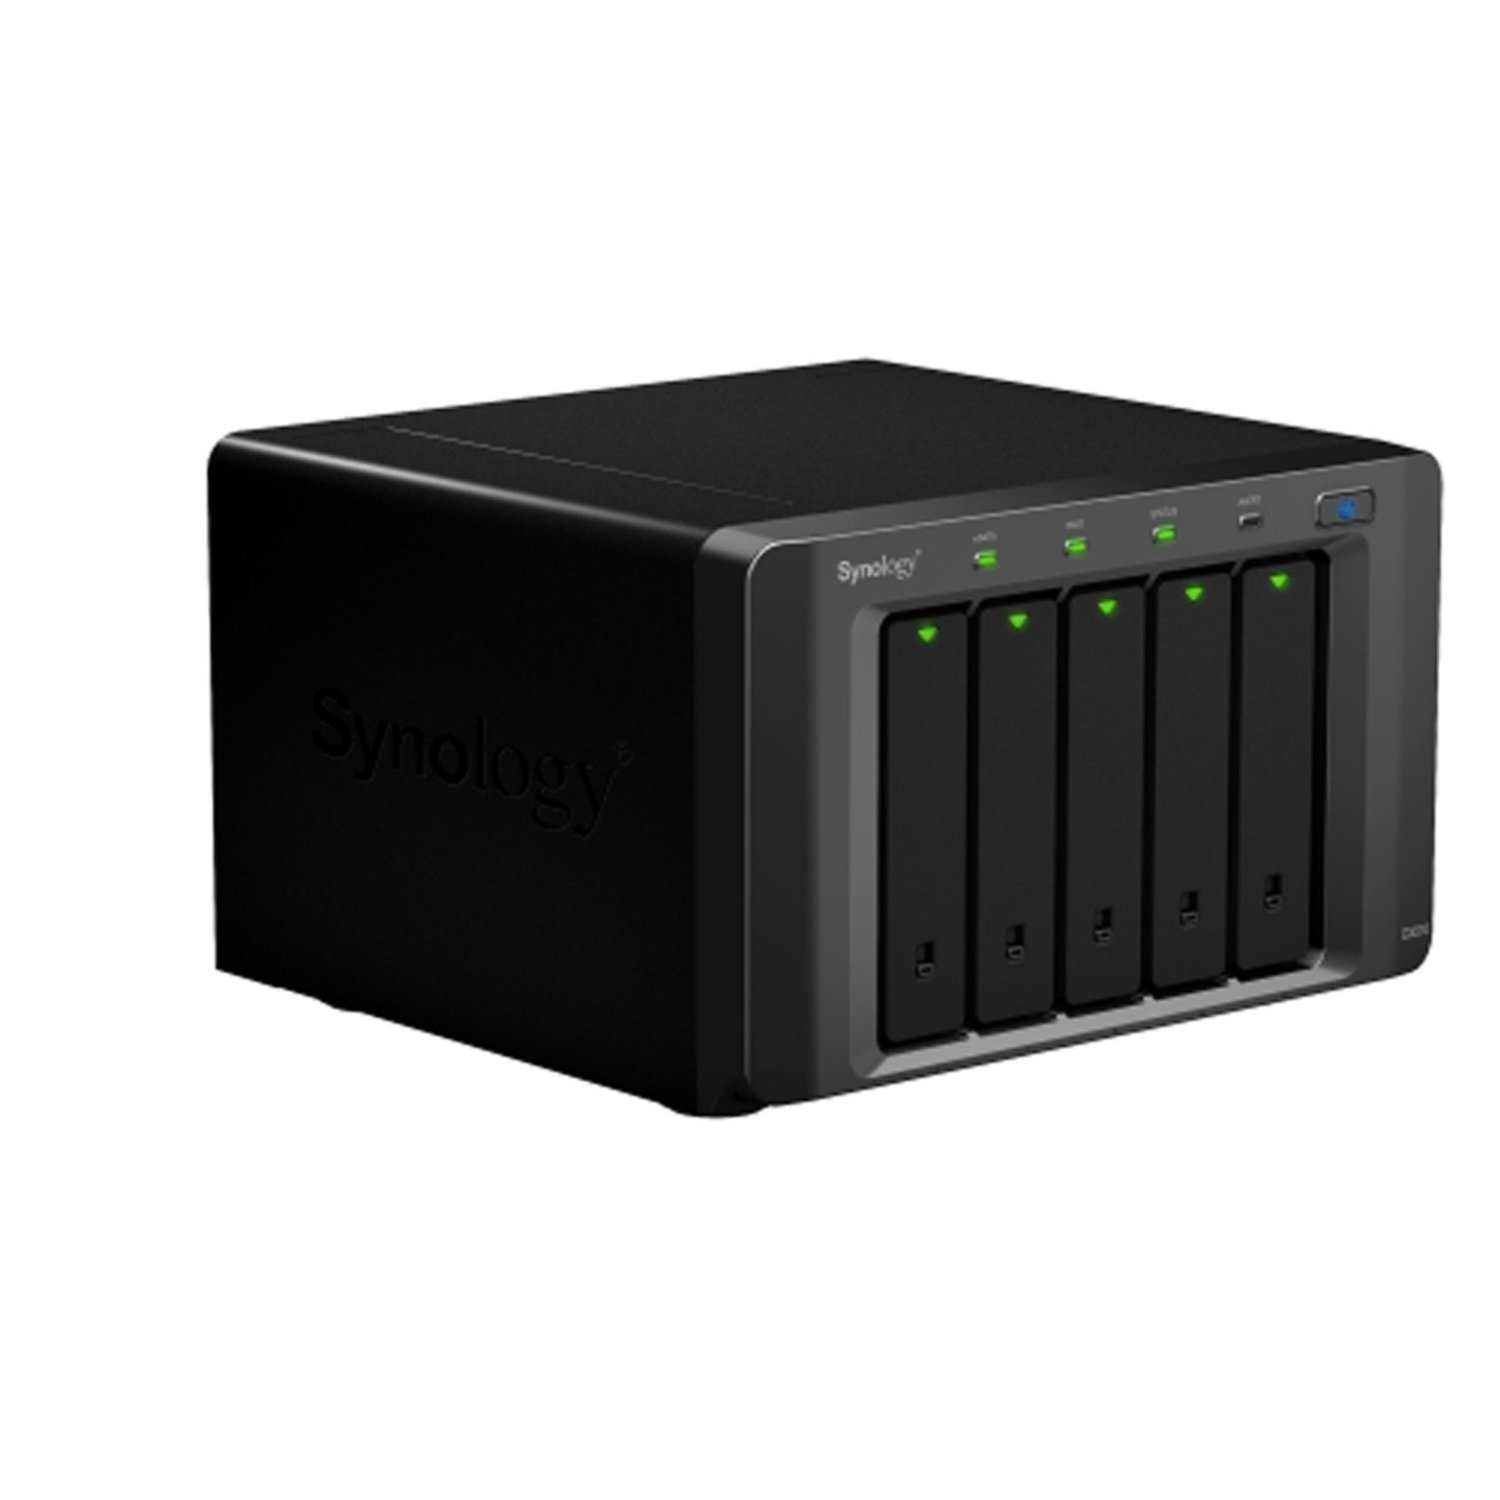 http://thetechjournal.com/wp-content/uploads/images/1201/1326213814-synology-5bay-plugnuse-expansion-unit-2.jpg